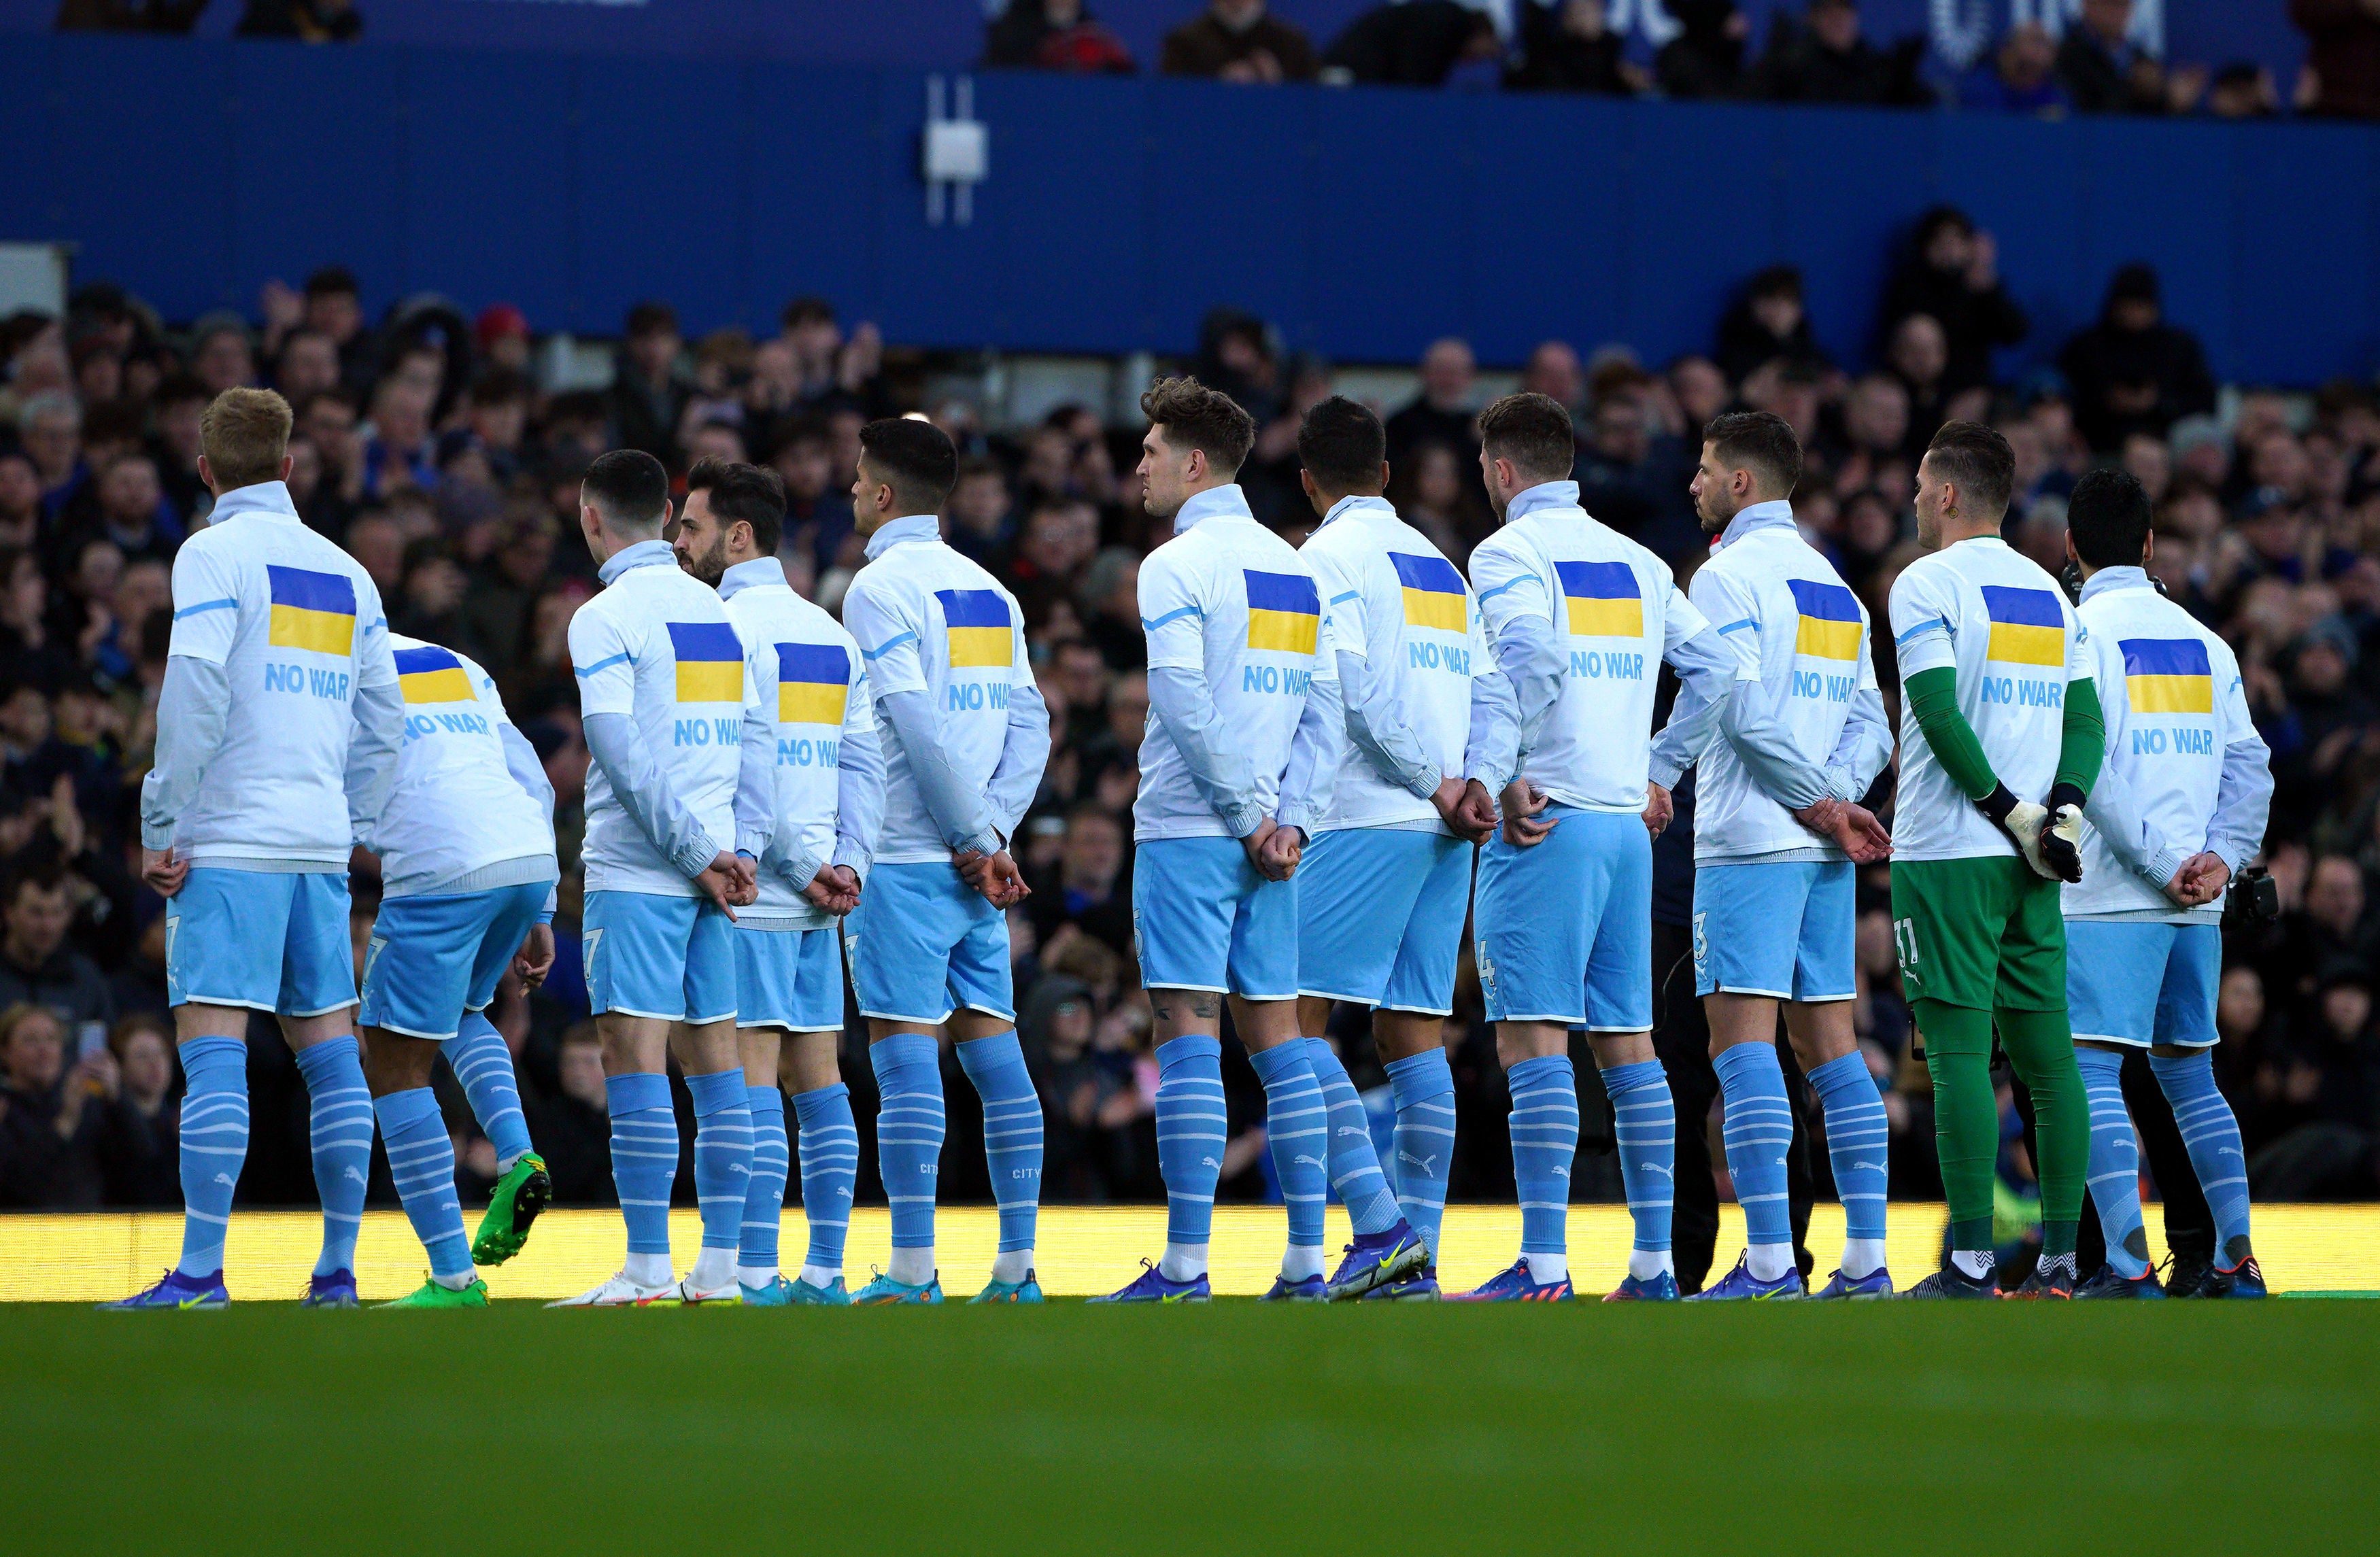 Goodison Park saw a show of solidarity for Ukraine last weekend